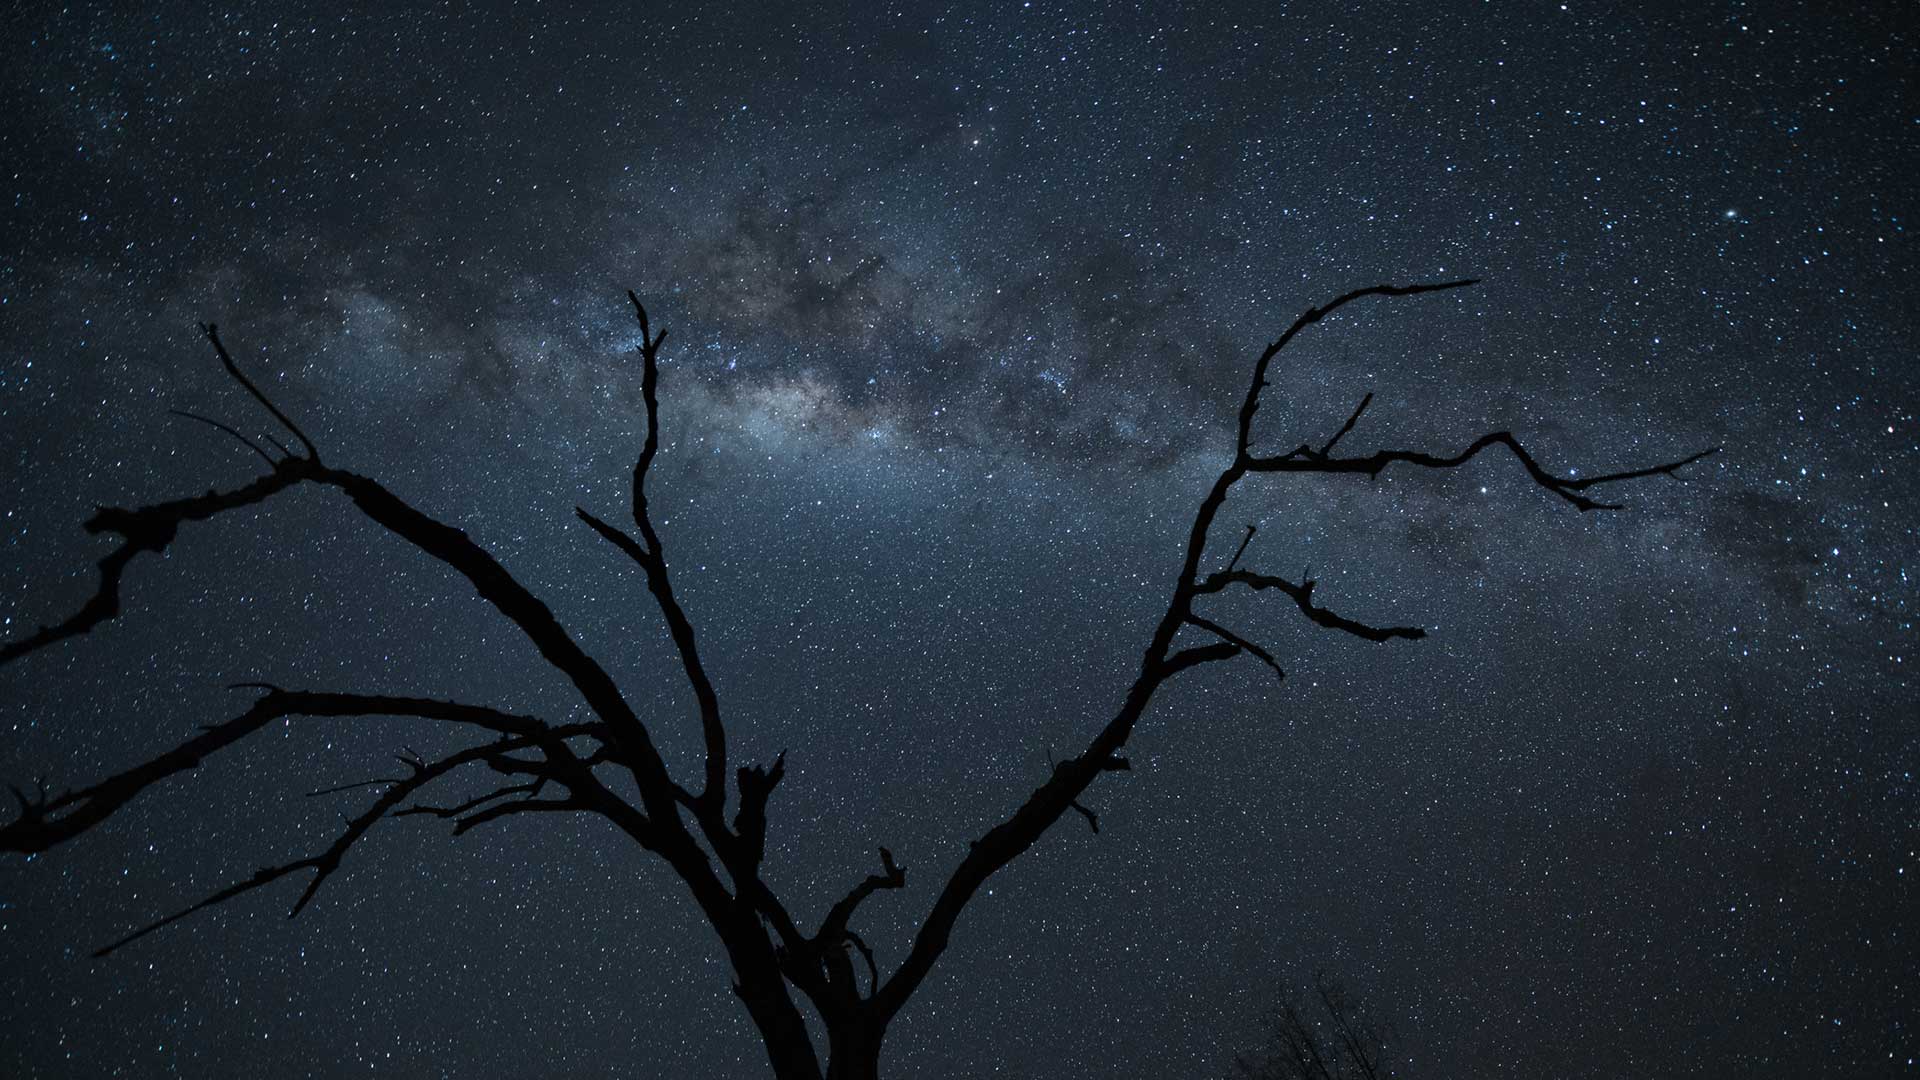 Adelaide night sky with milky way